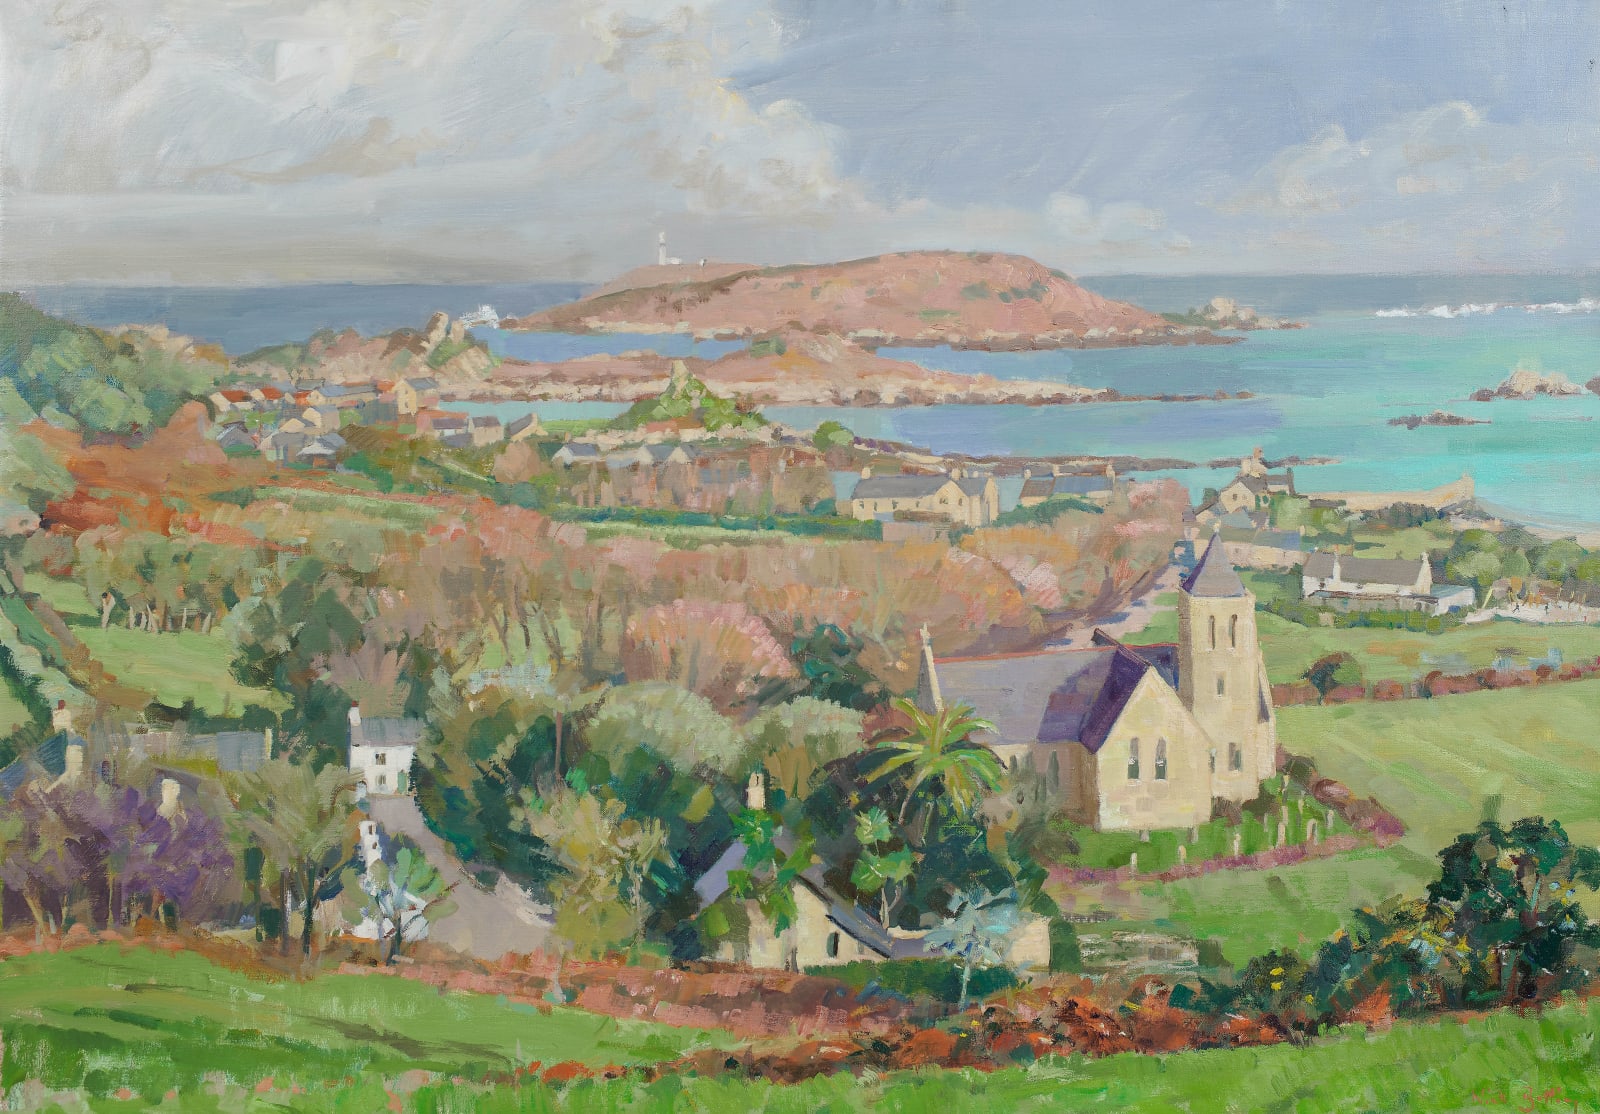 Nick Botting, 4. North, Northeast from Tresco with Sun